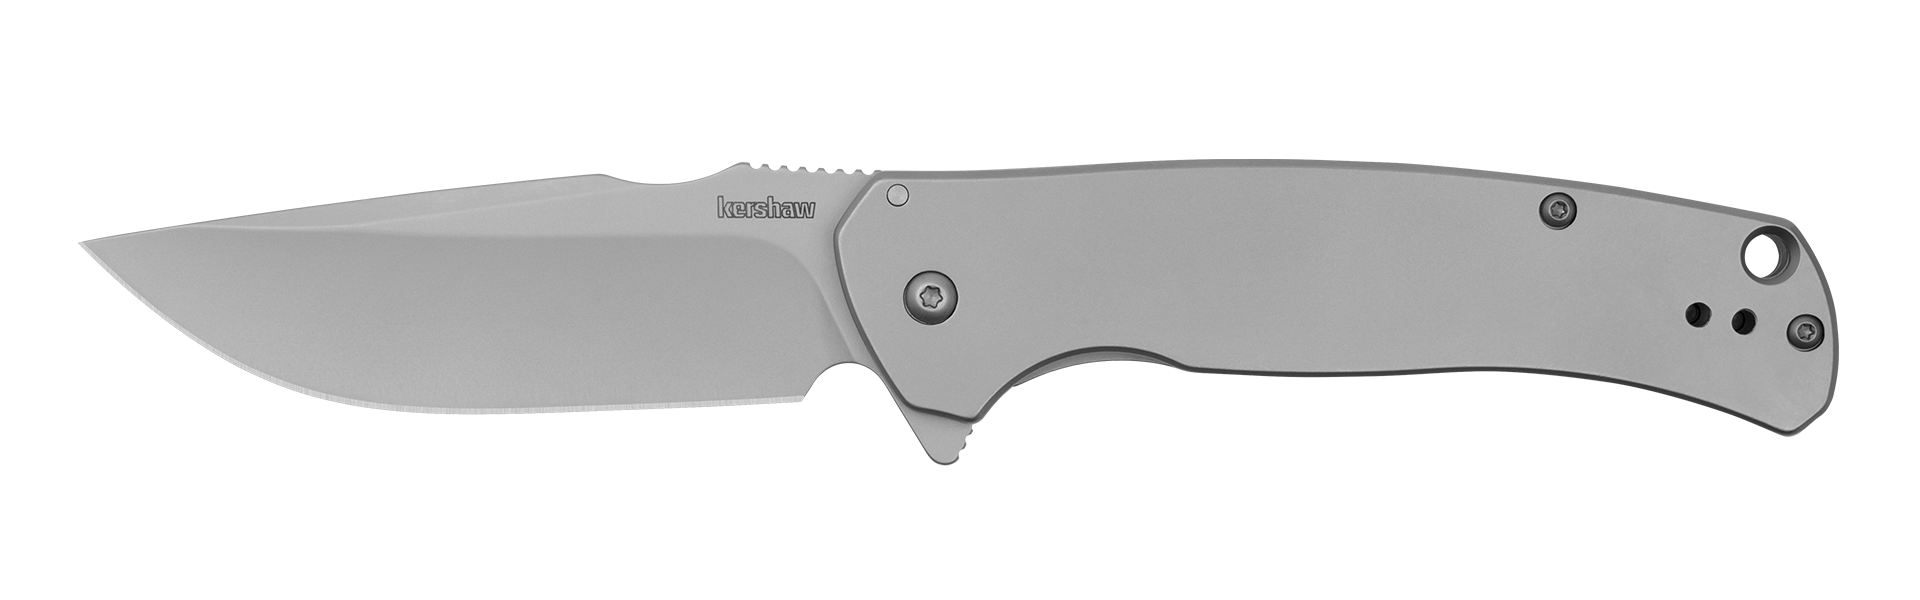 Kershaw Scour - Frame Lock - Assisted Opening - 8Cr13MoV Steel - 1416